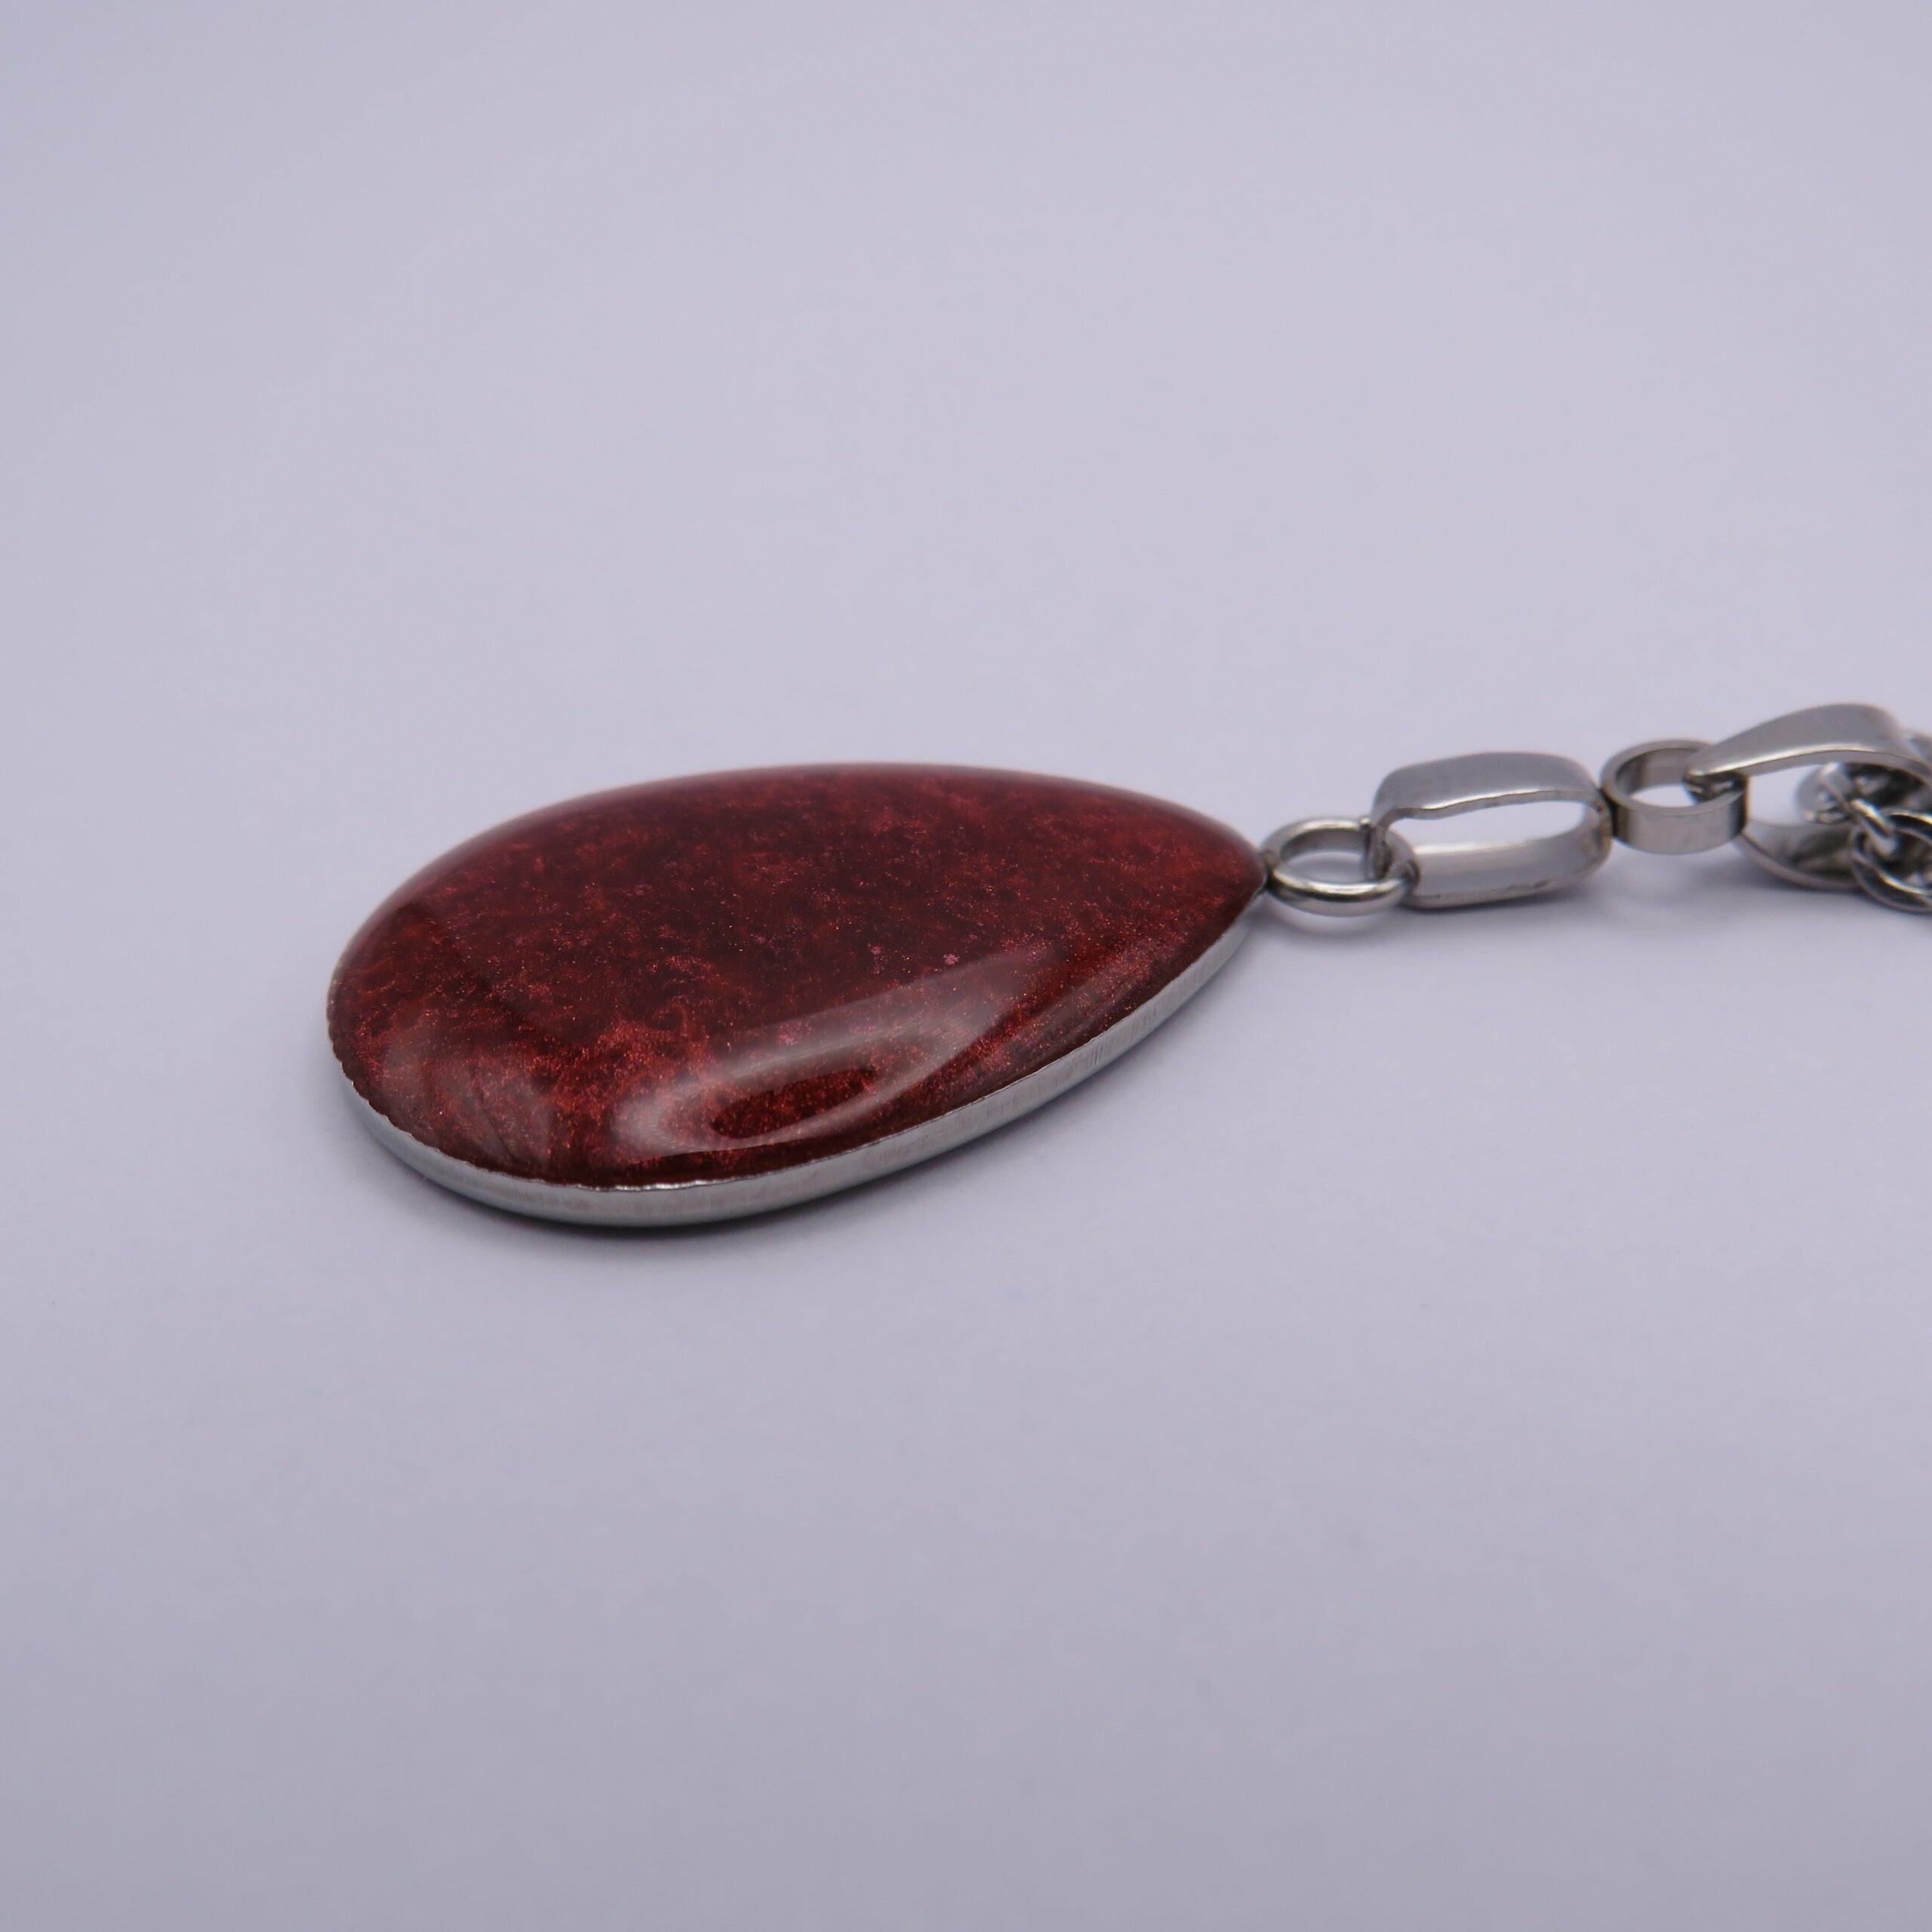 Stainless Steel Red Cabochon Pendant Necklace